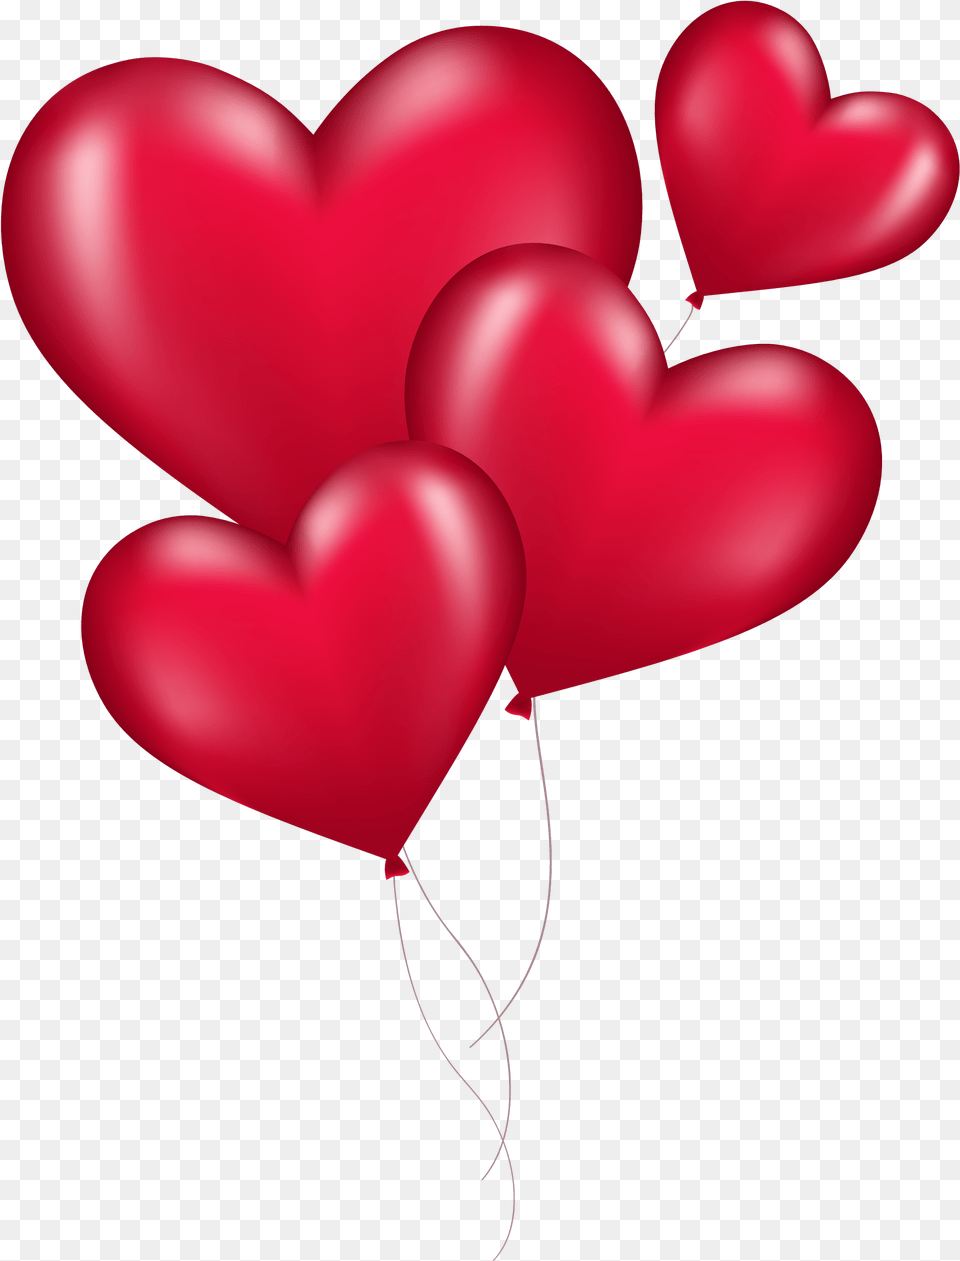 Images Love Heart Love Heart Balloons, Balloon Png Image